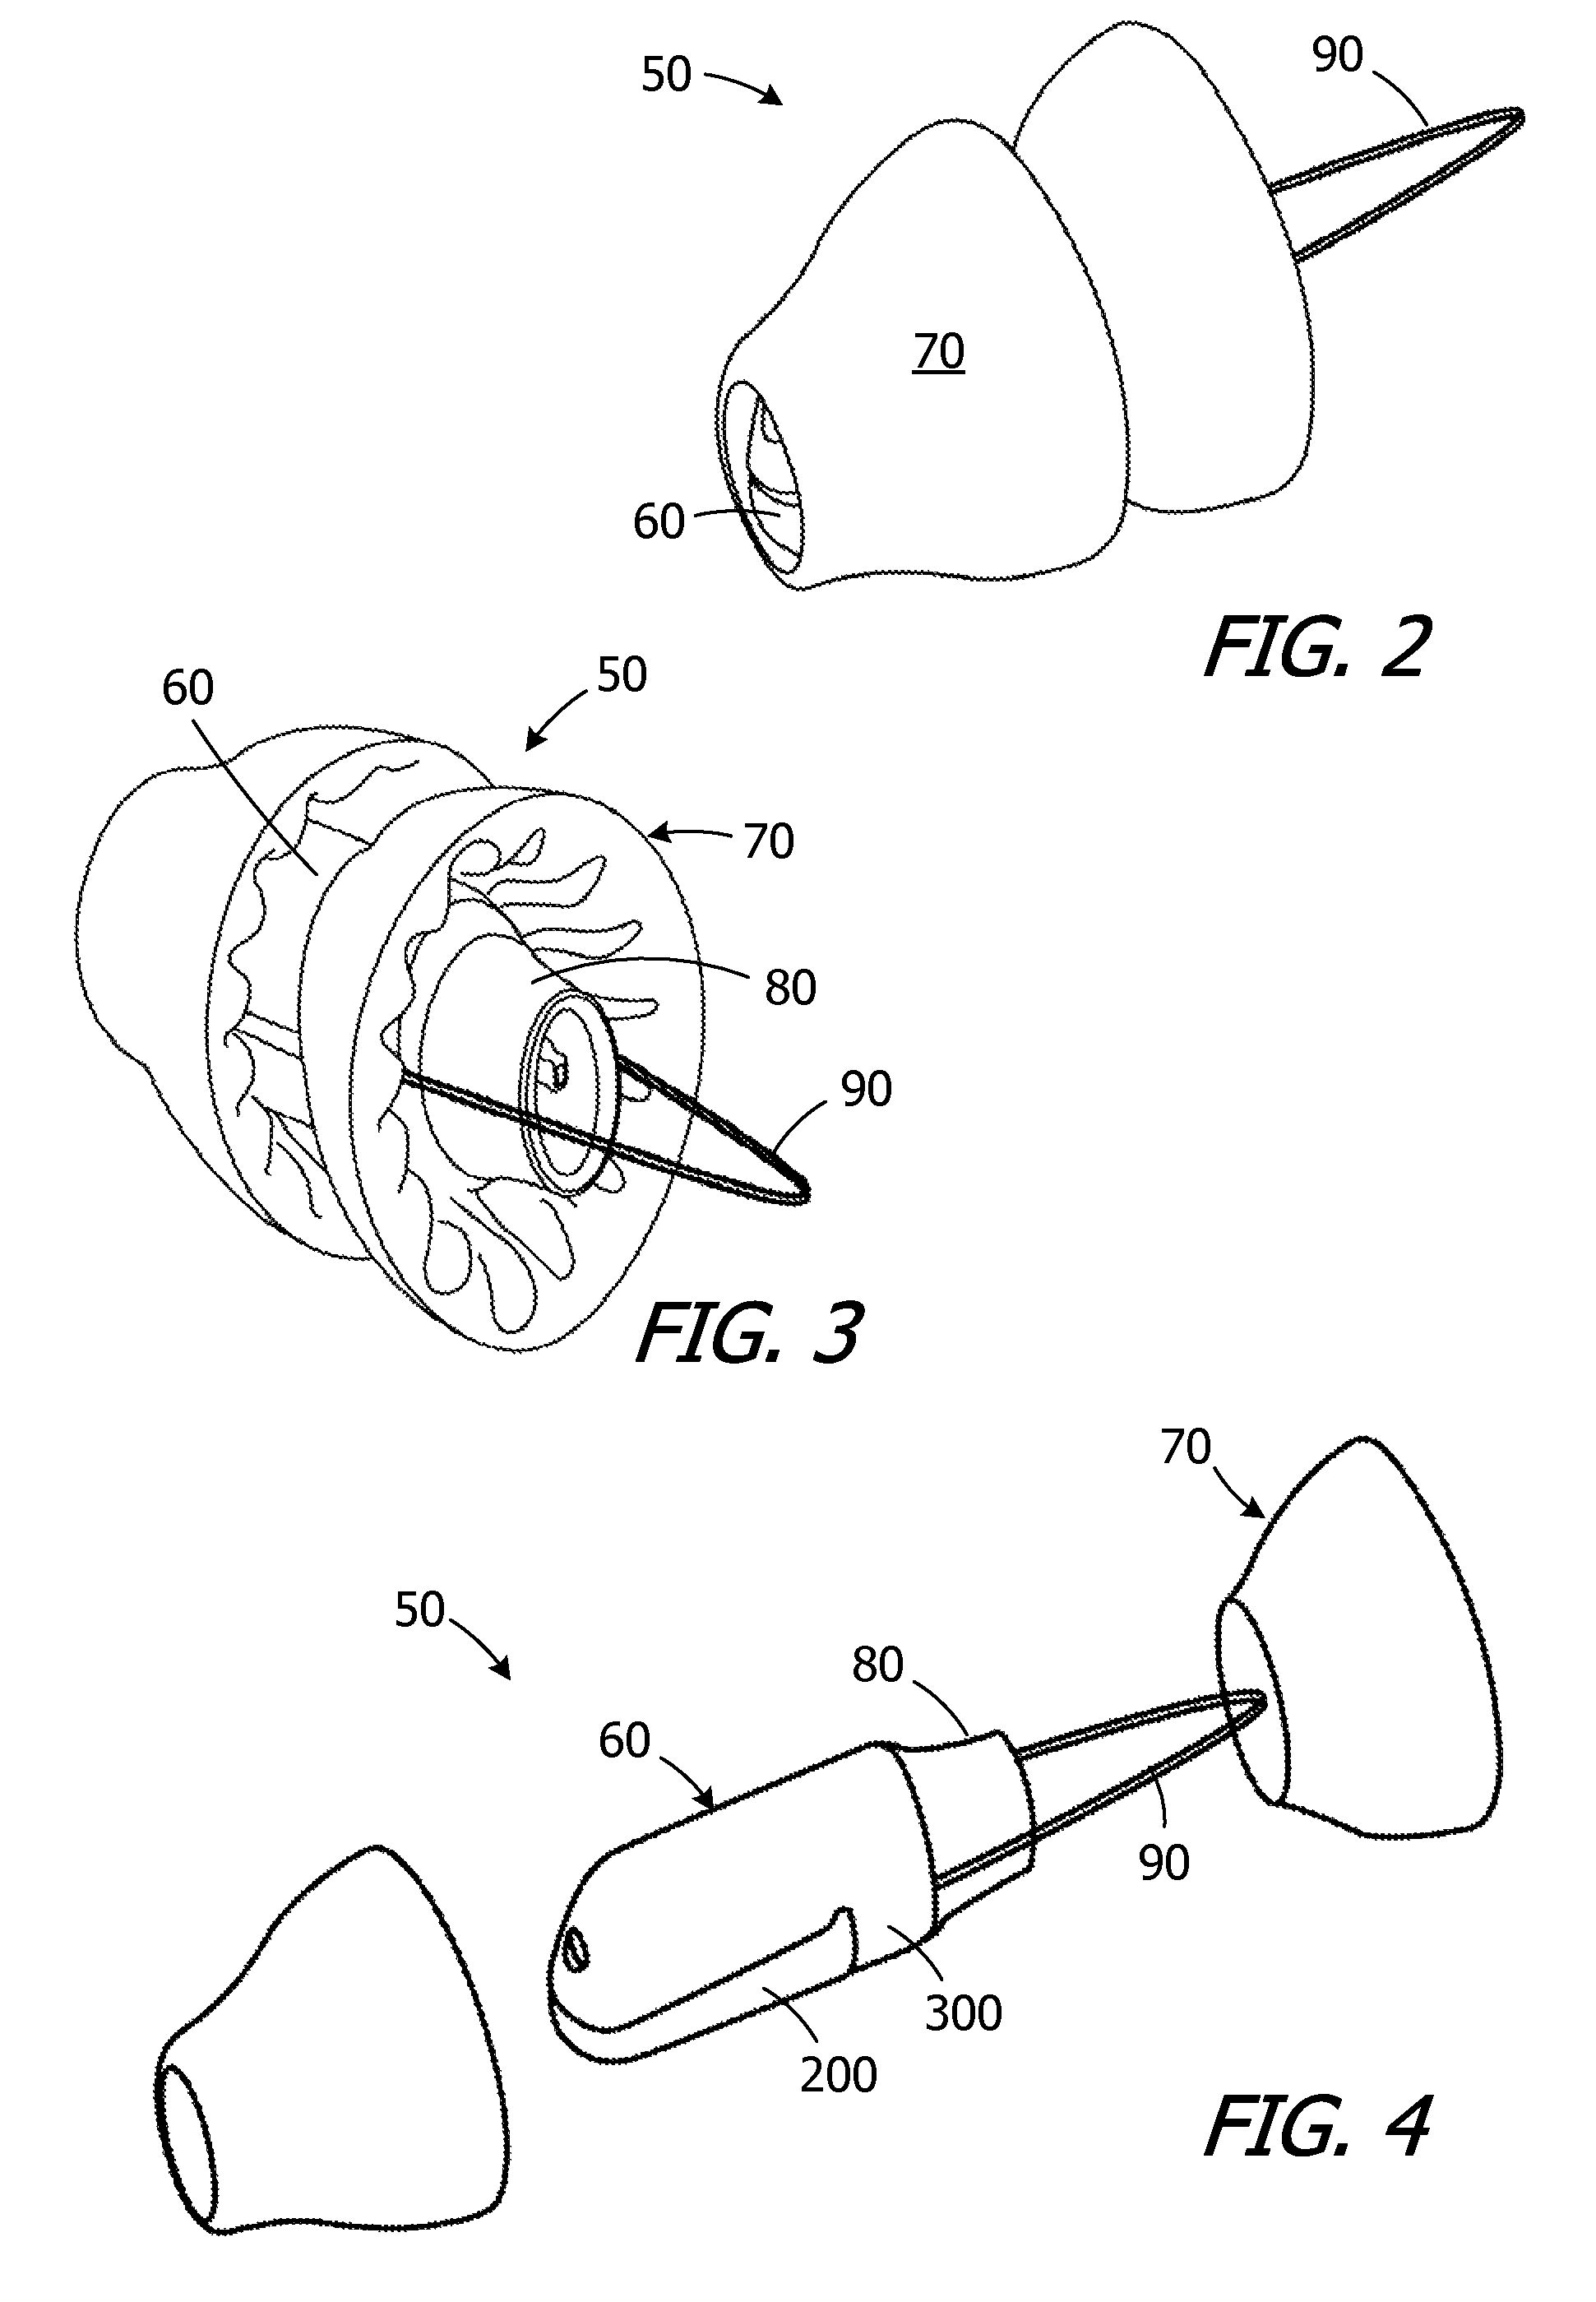 Canal hearing devices and batteries for use with same